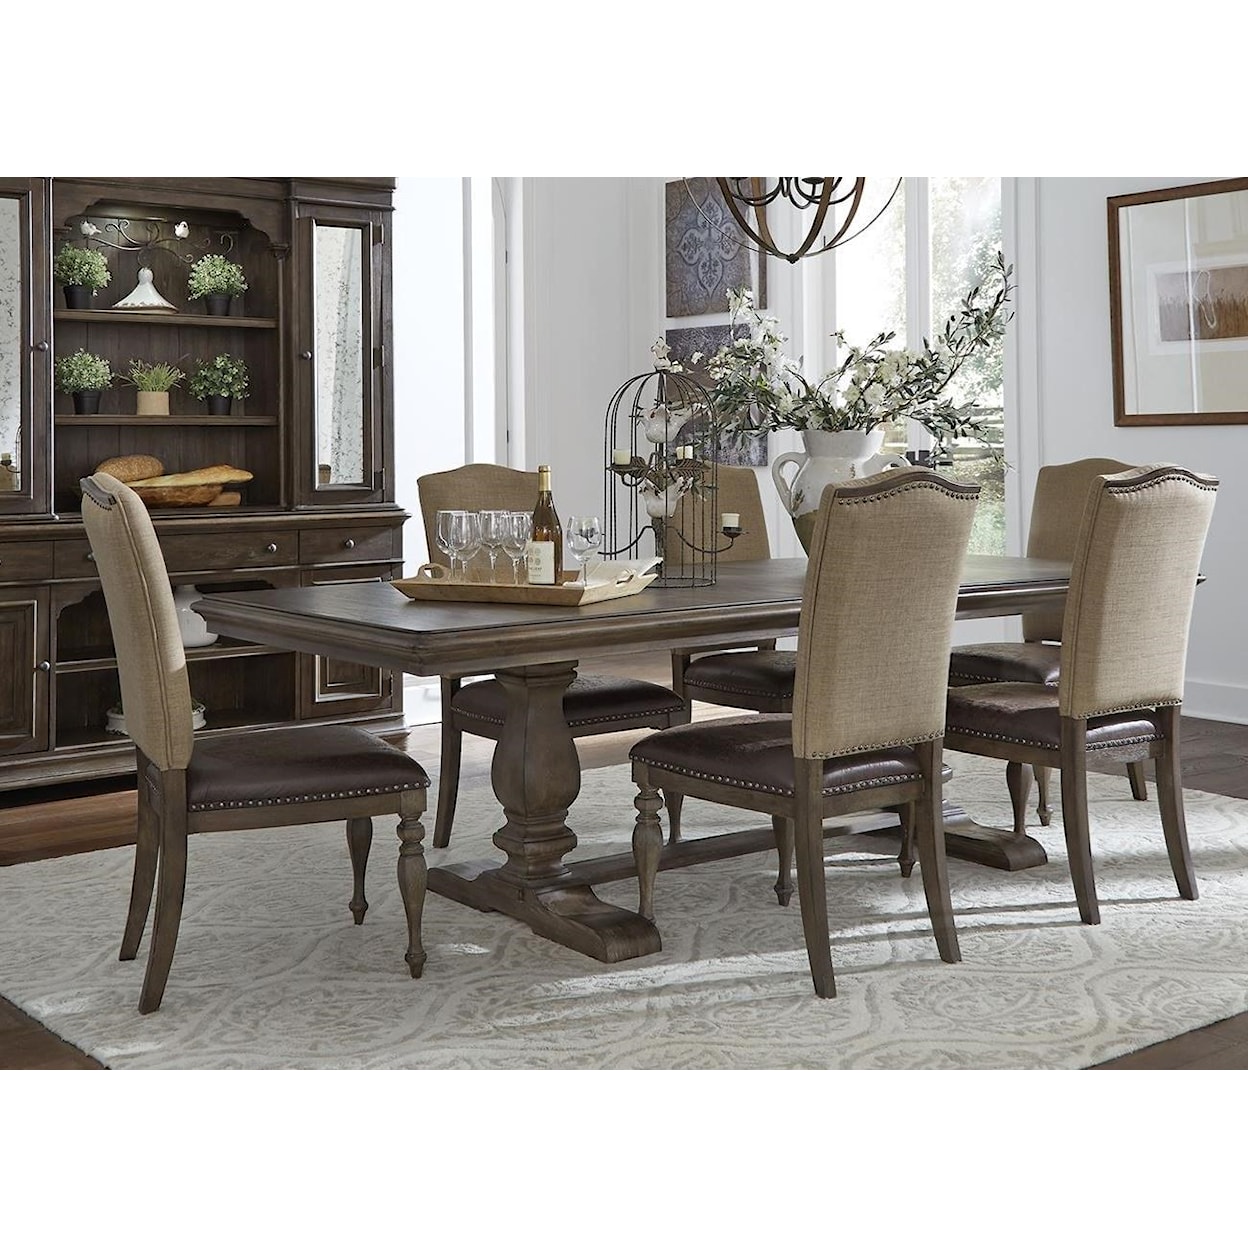 Liberty Furniture Homestead 7-Piece Table and Chair Set